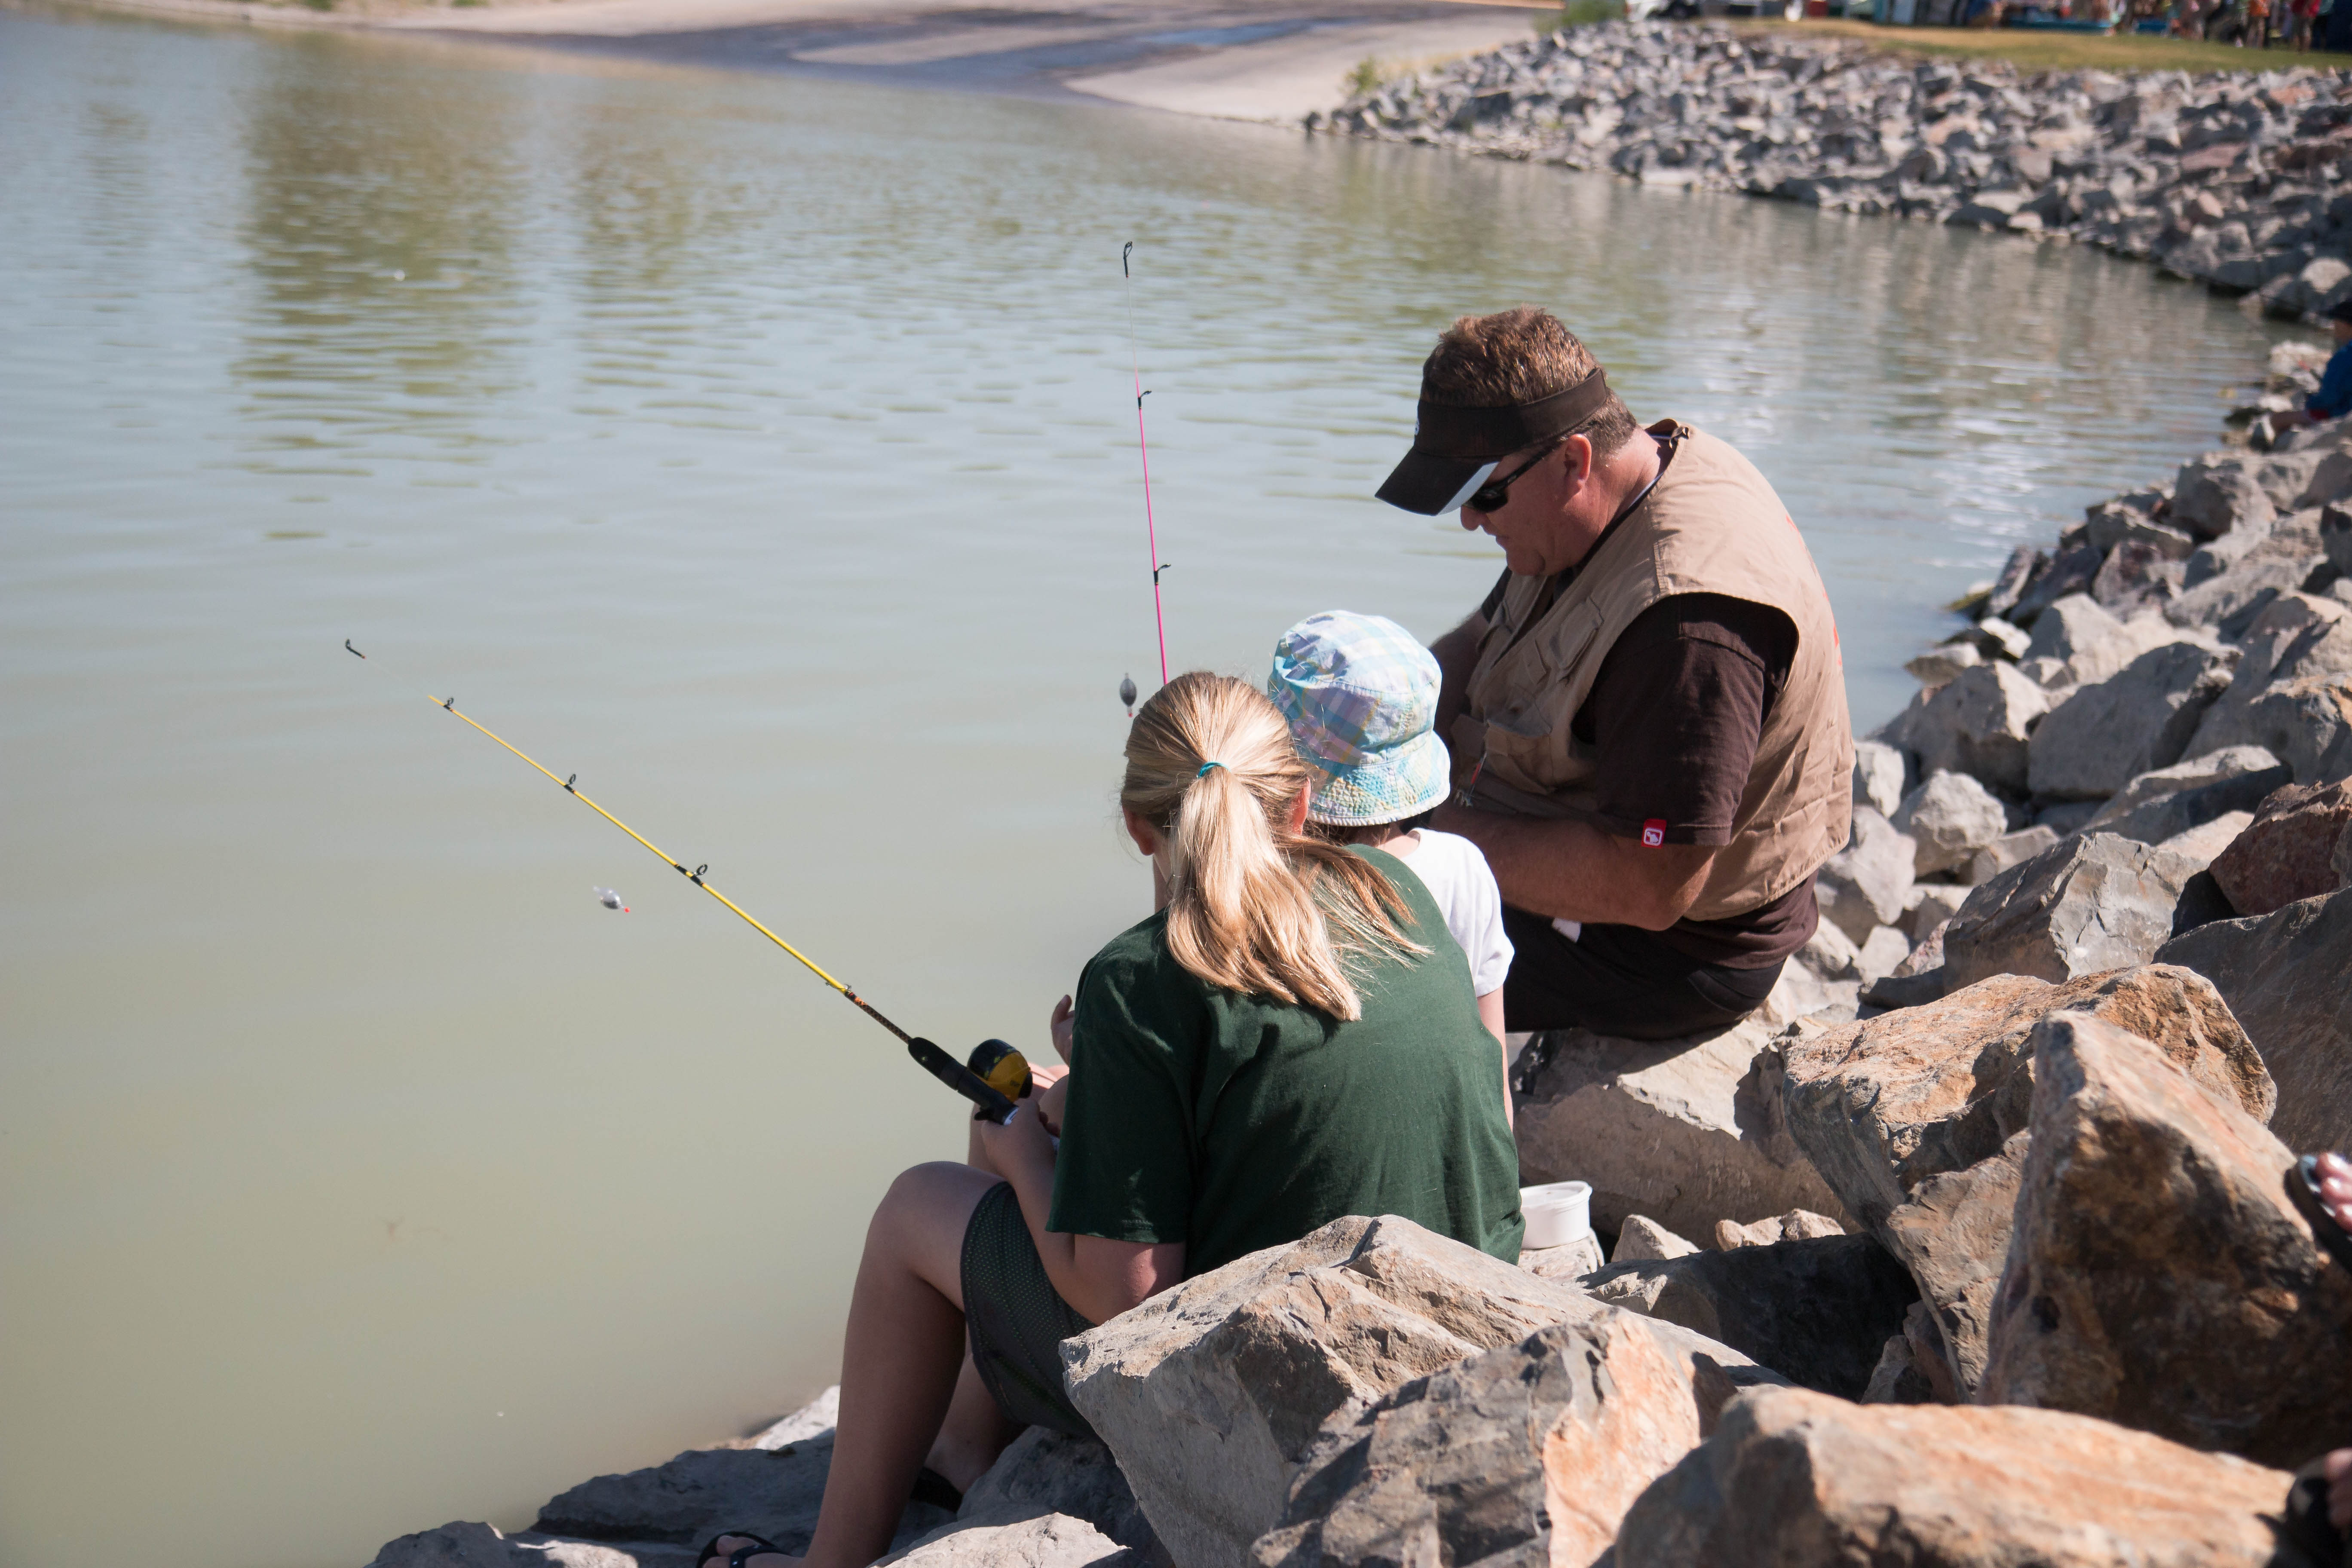 Utah Lake Festival provided information and fun on Free Fishing Day